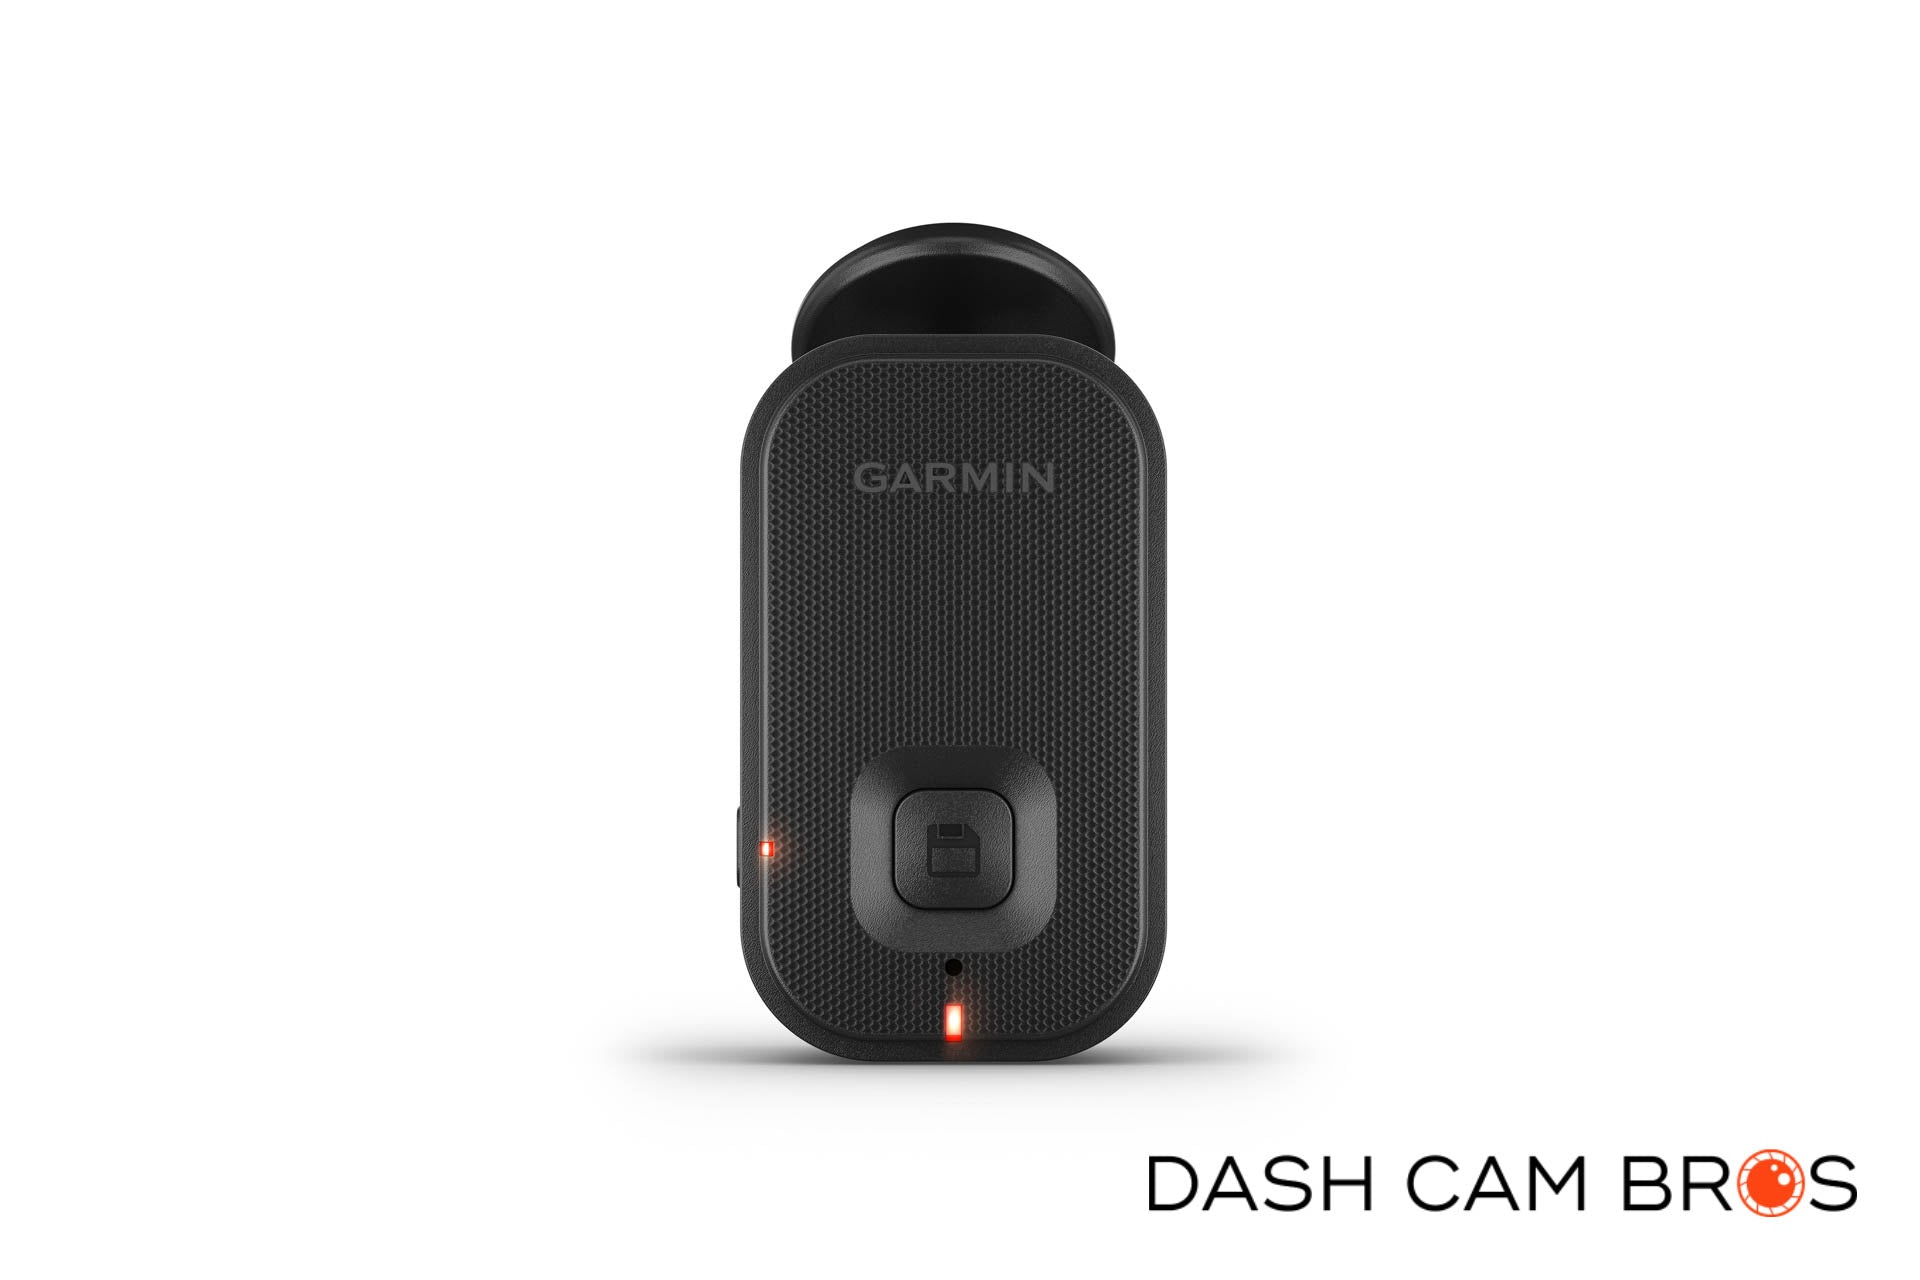 Garmin Dash Cam Mini 2, Tiny Size & SanDisk 128GB High Endurance Video  MicroSDXC Card with Adapter for Dash Cam and Home Monitoring Systems - C10,  U3